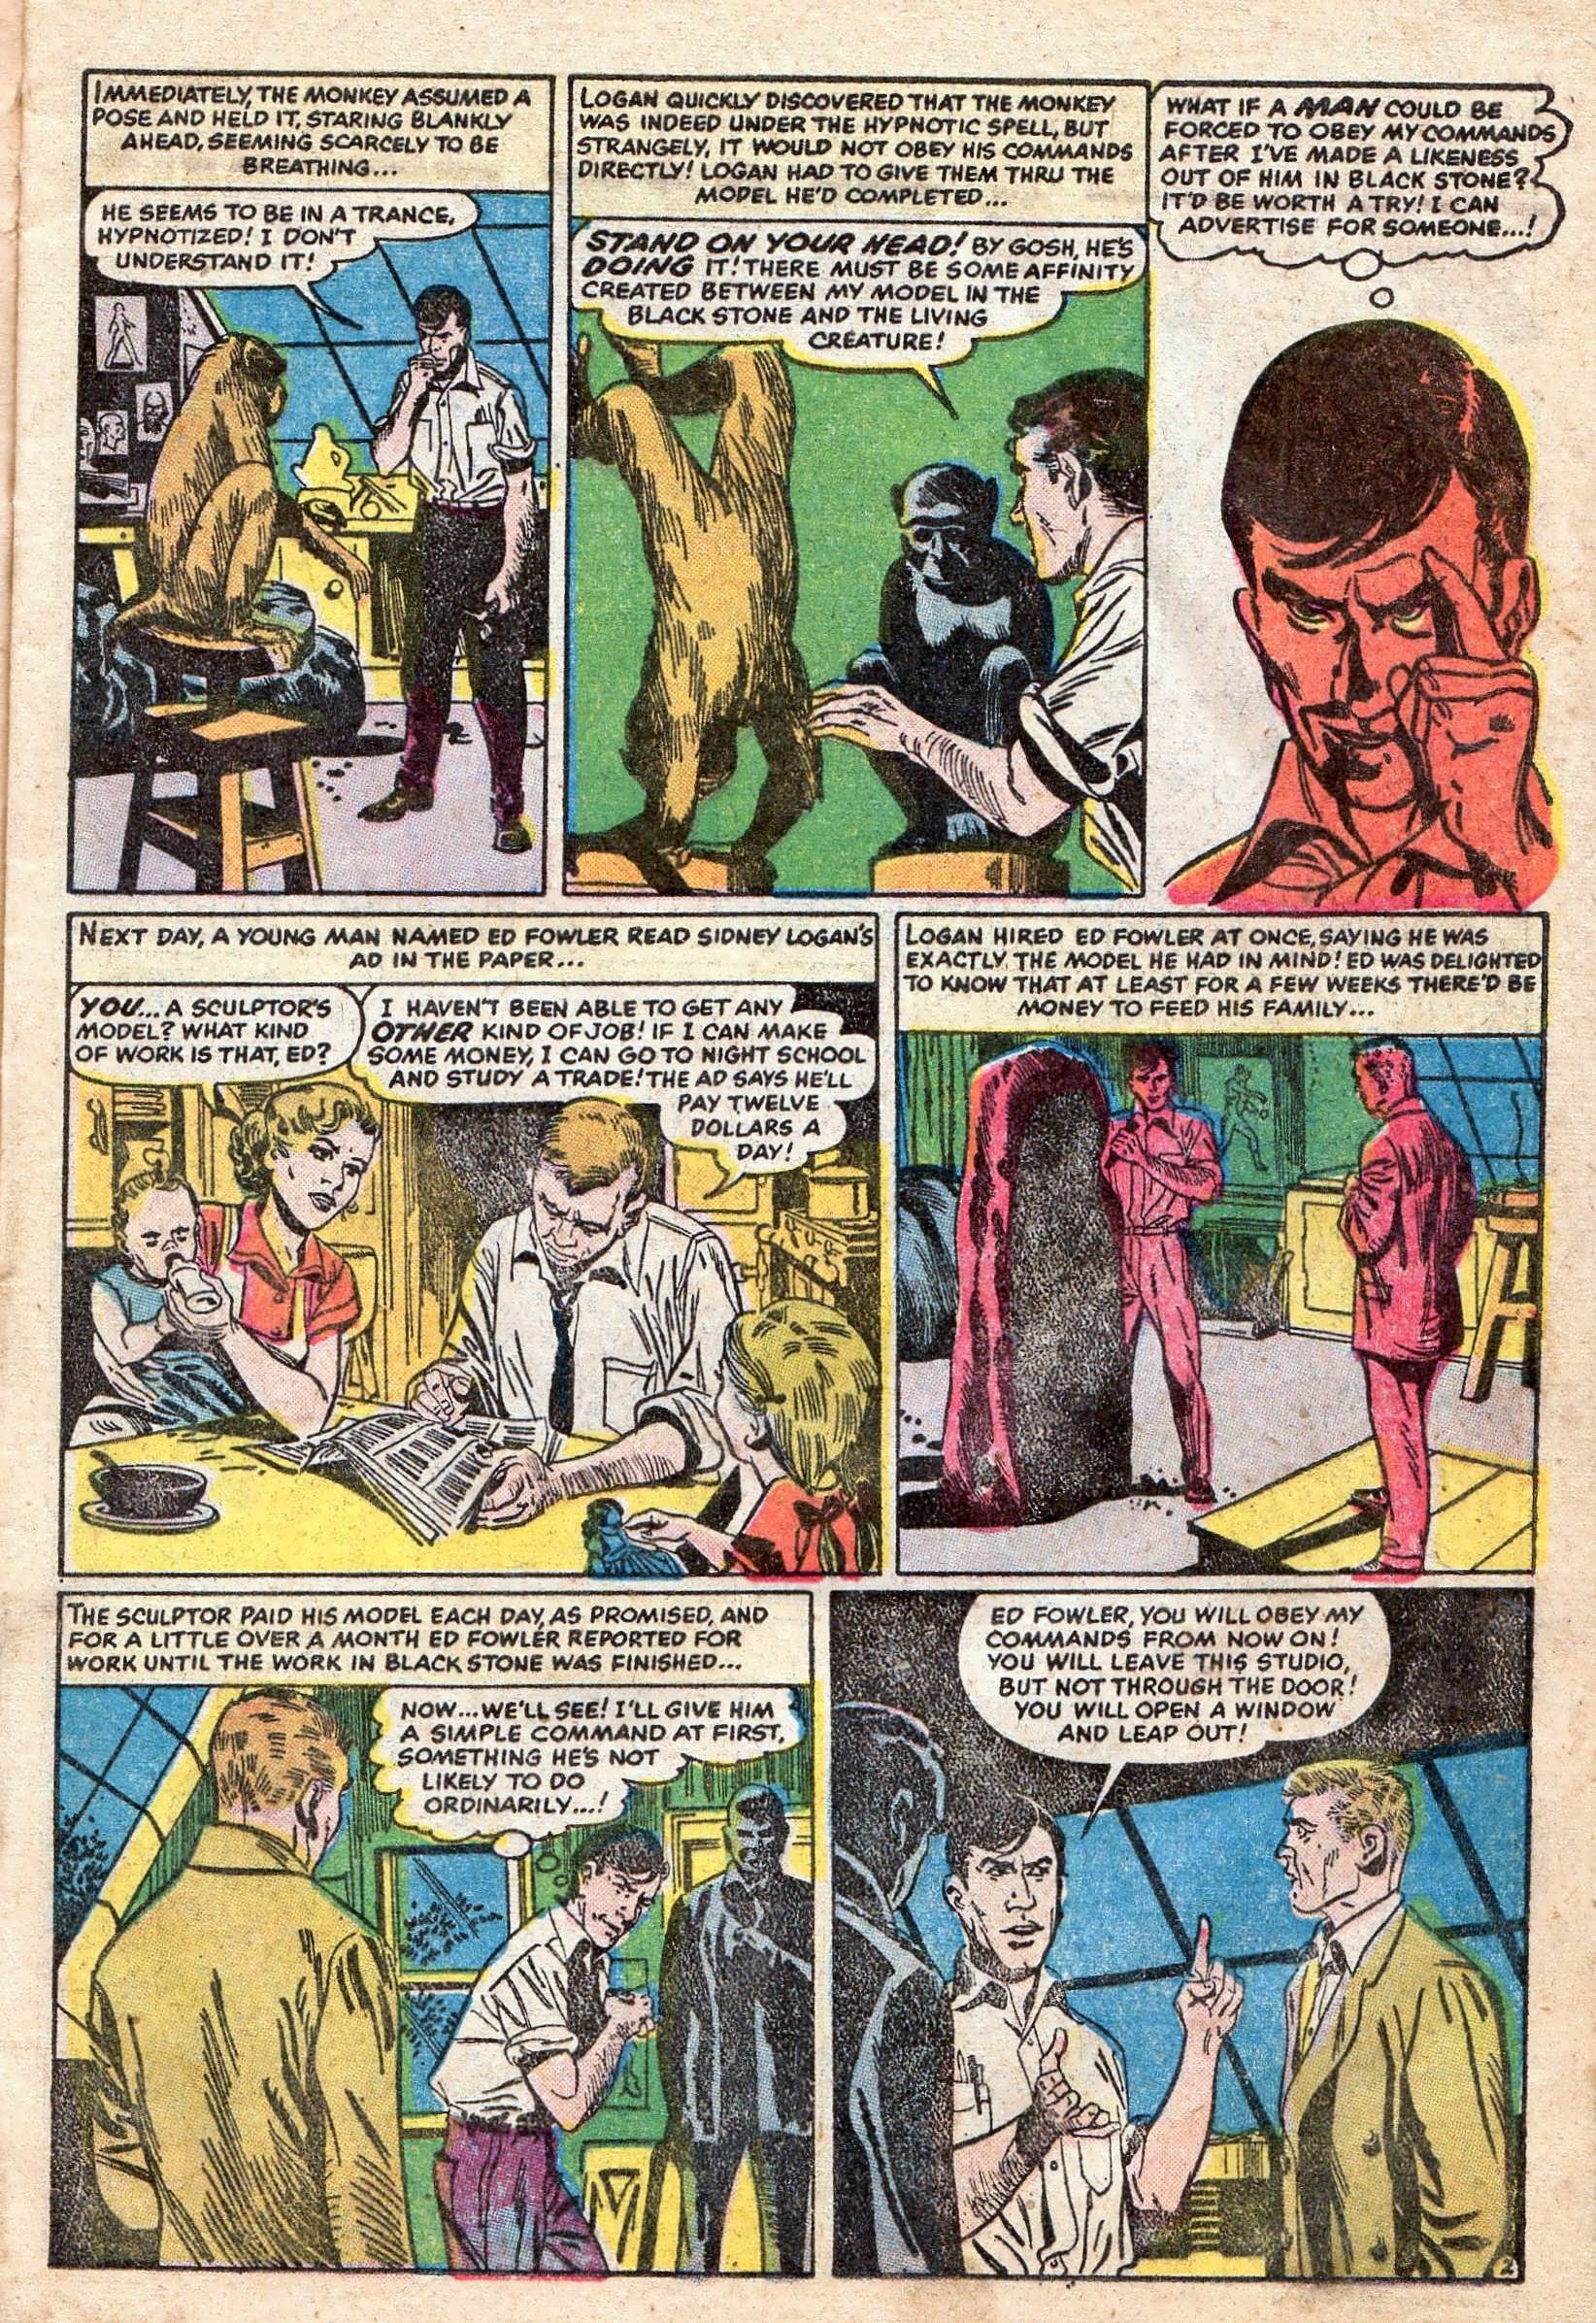 Marvel Tales (1949) 158 Page 8